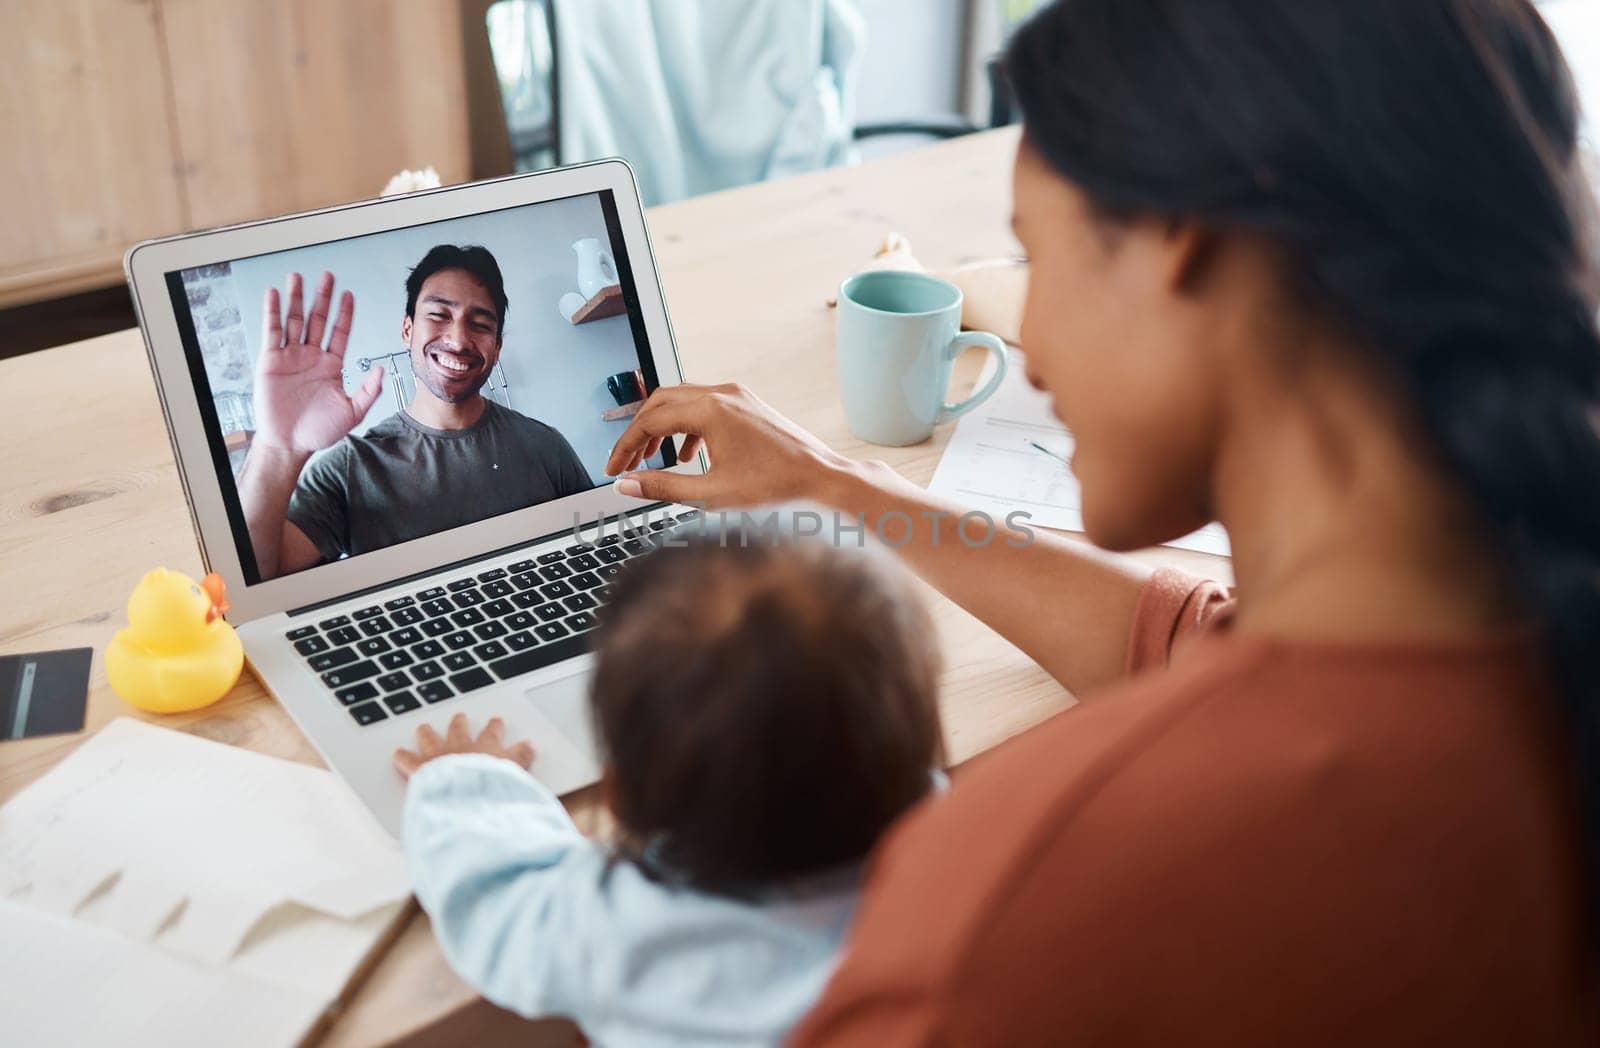 Family on video call, mom and baby happy to see smiling father waving with laptop webcam to talk to each other. Mother, young child talking to dad at work from home and using 5g streaming technology.